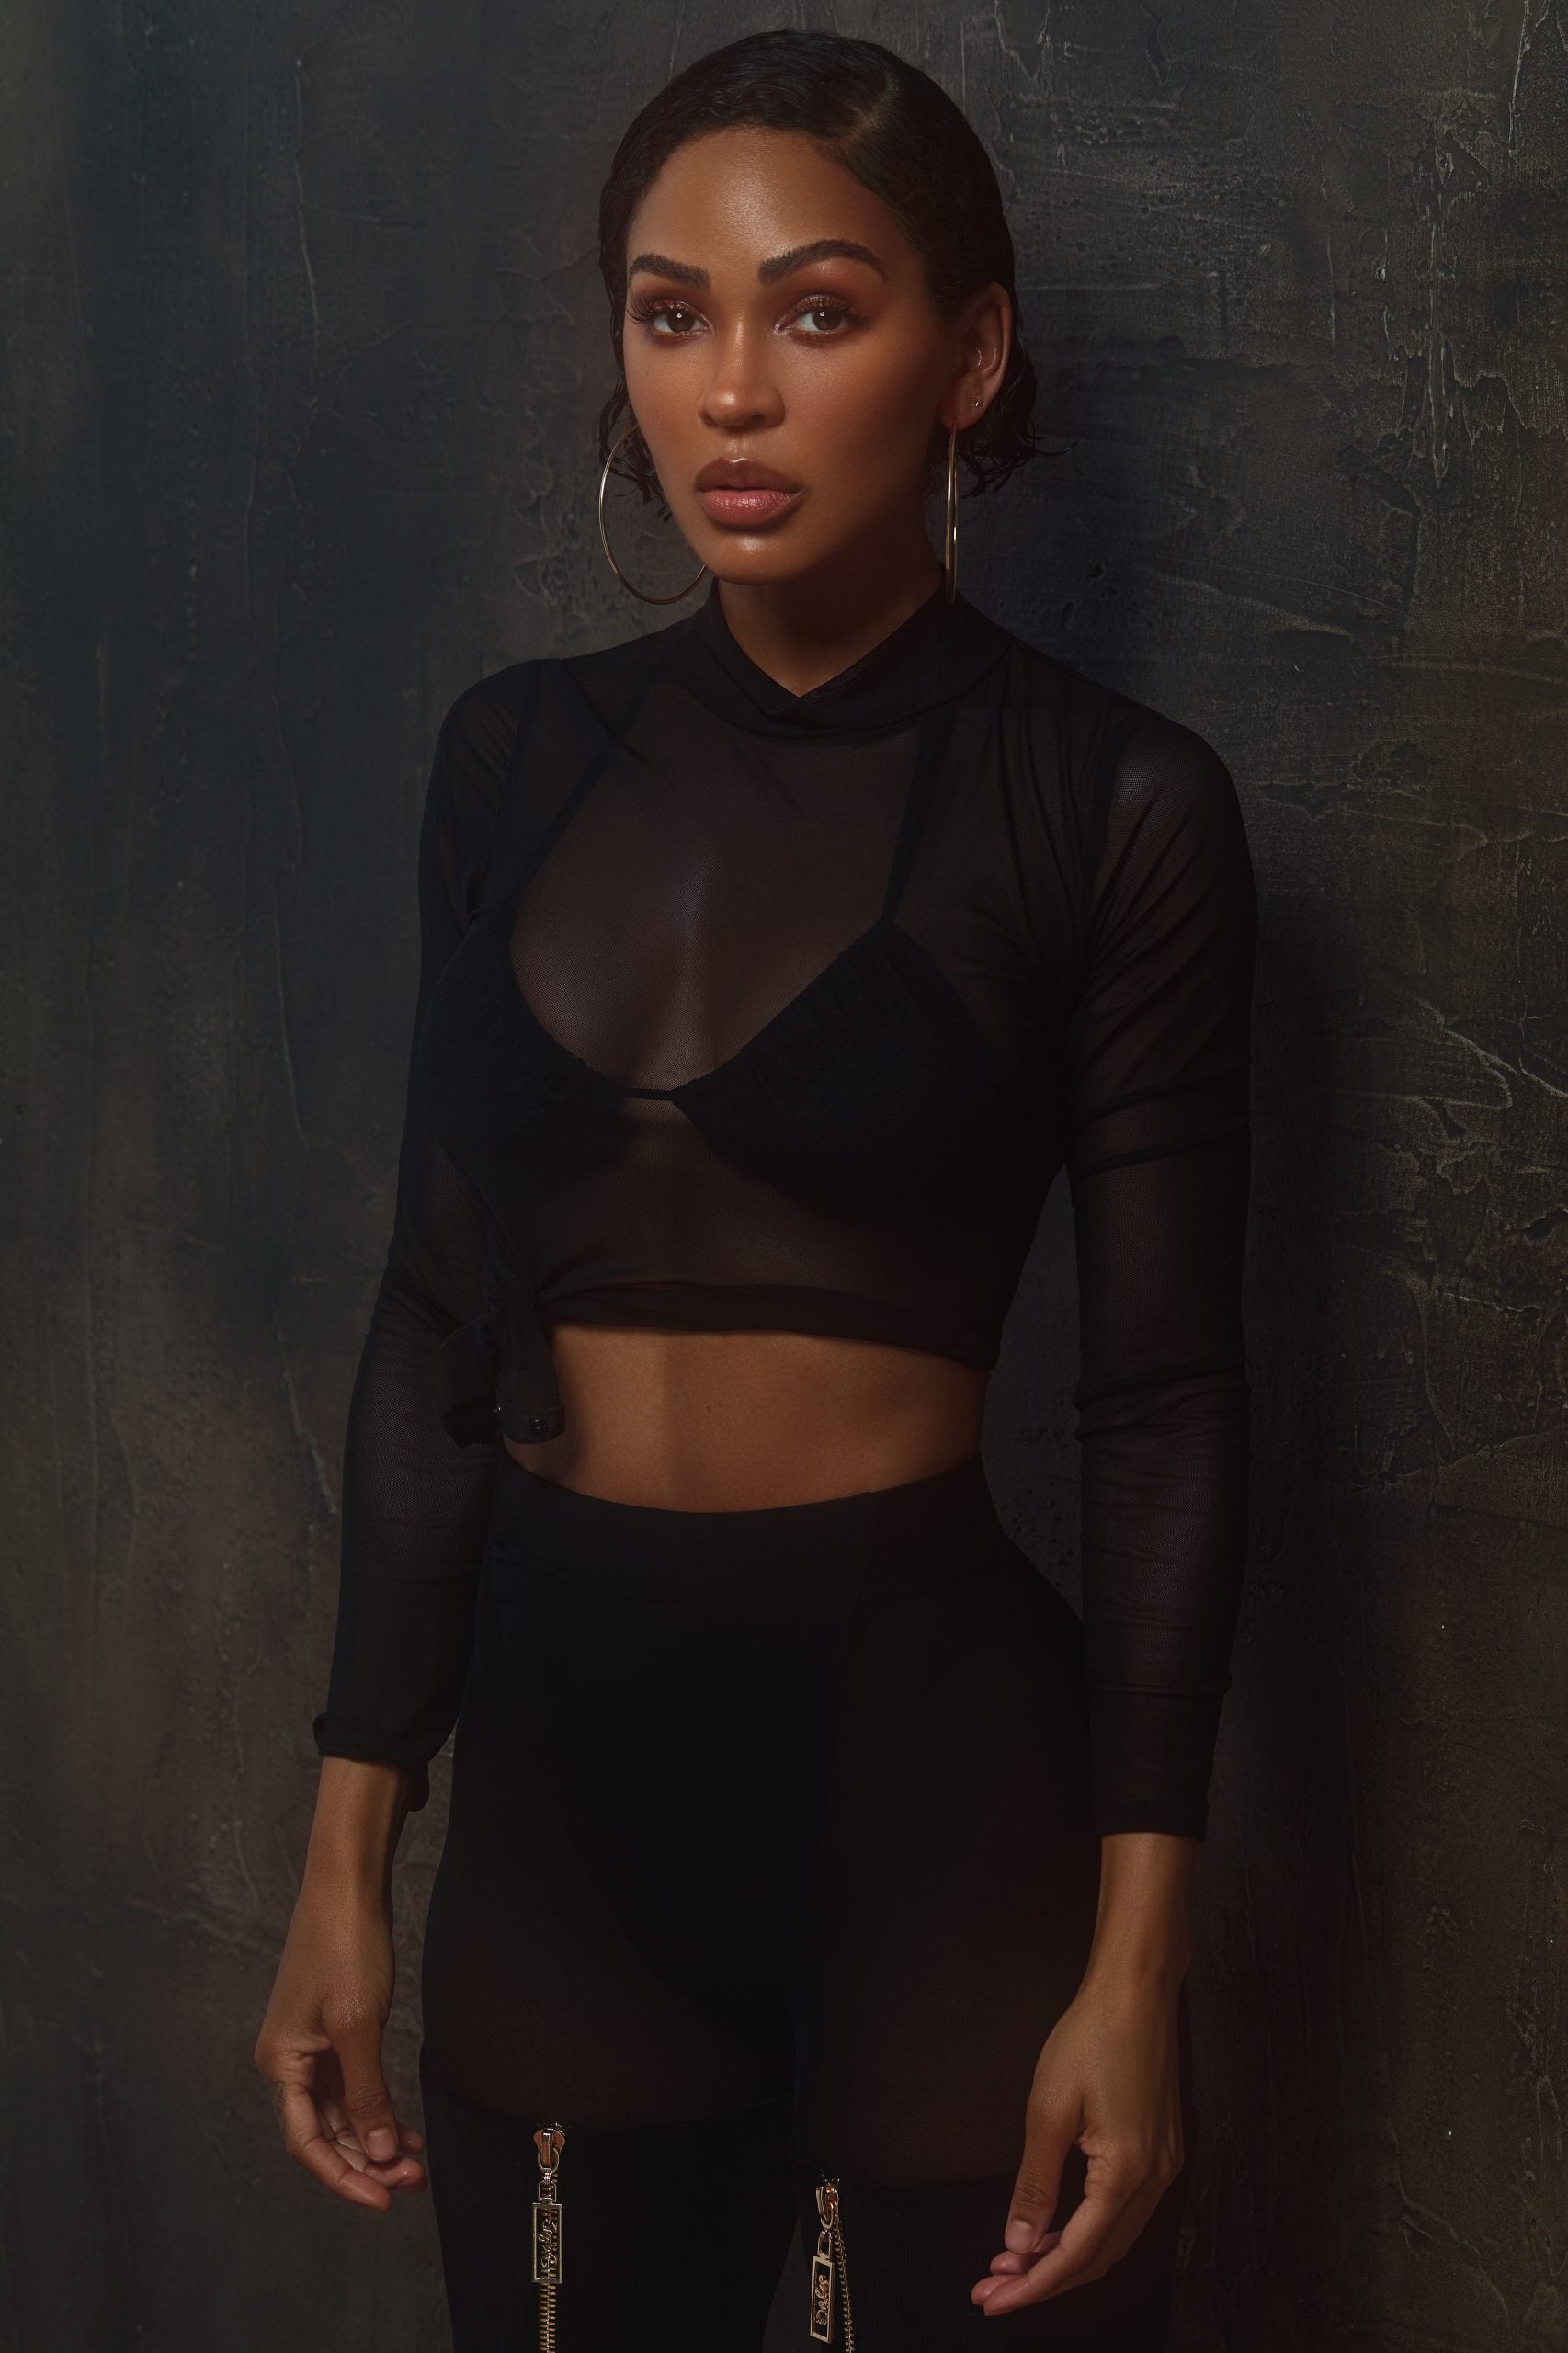 Exclusive: Meagan Good Commemorates 40th Birthday With Timeless Photoshoot